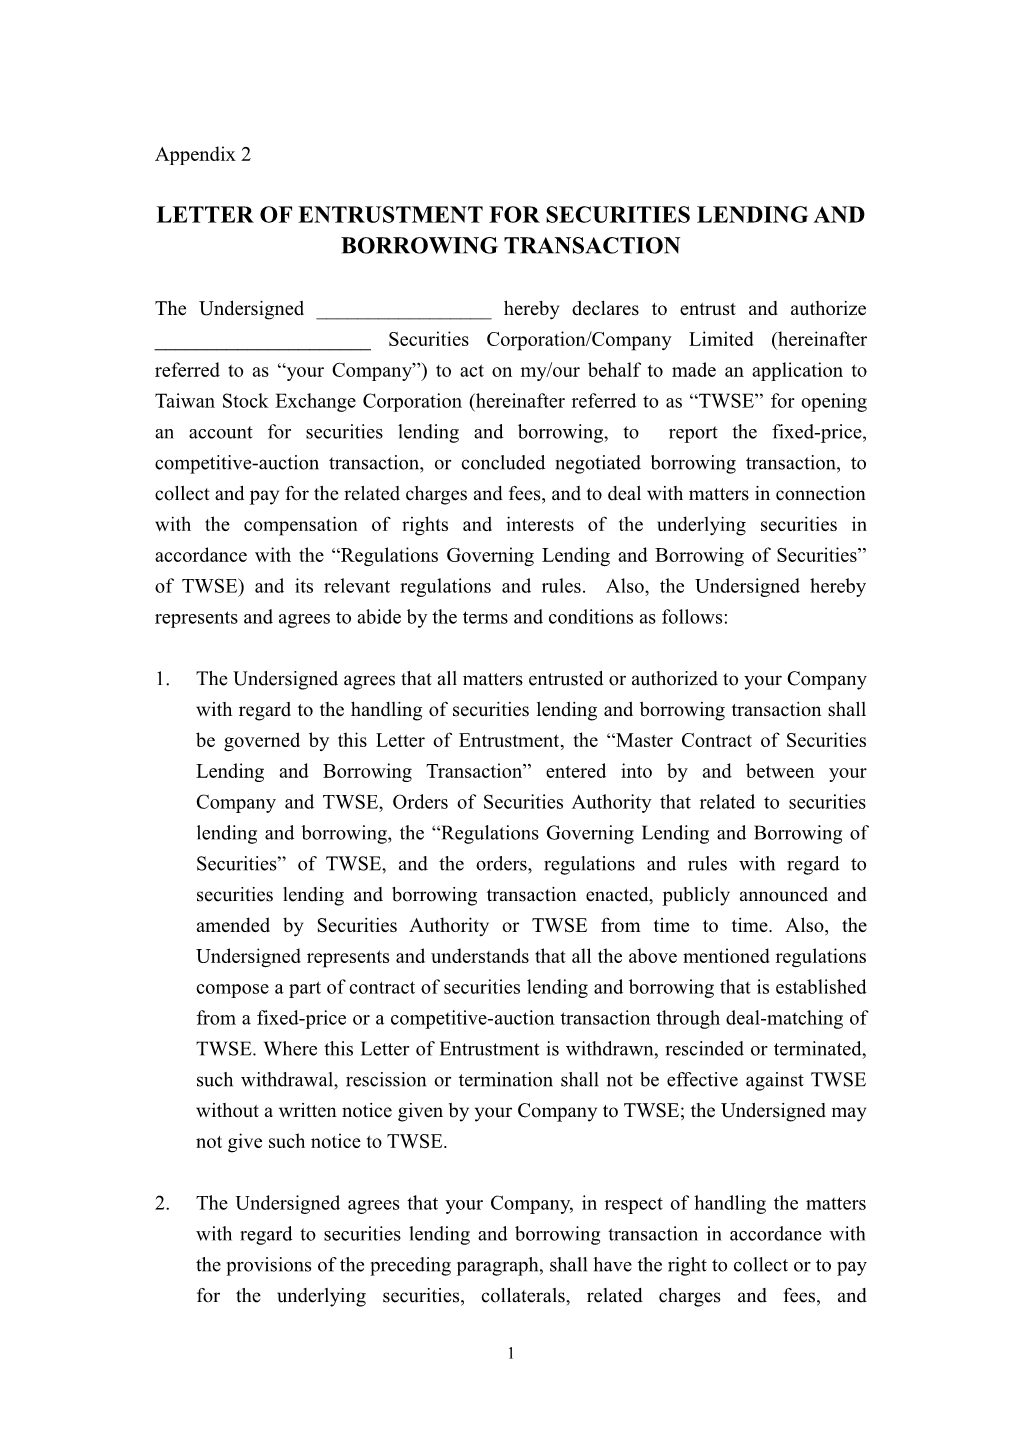 Letter of Entrustment for Securities Lending and Borrowing Transaction